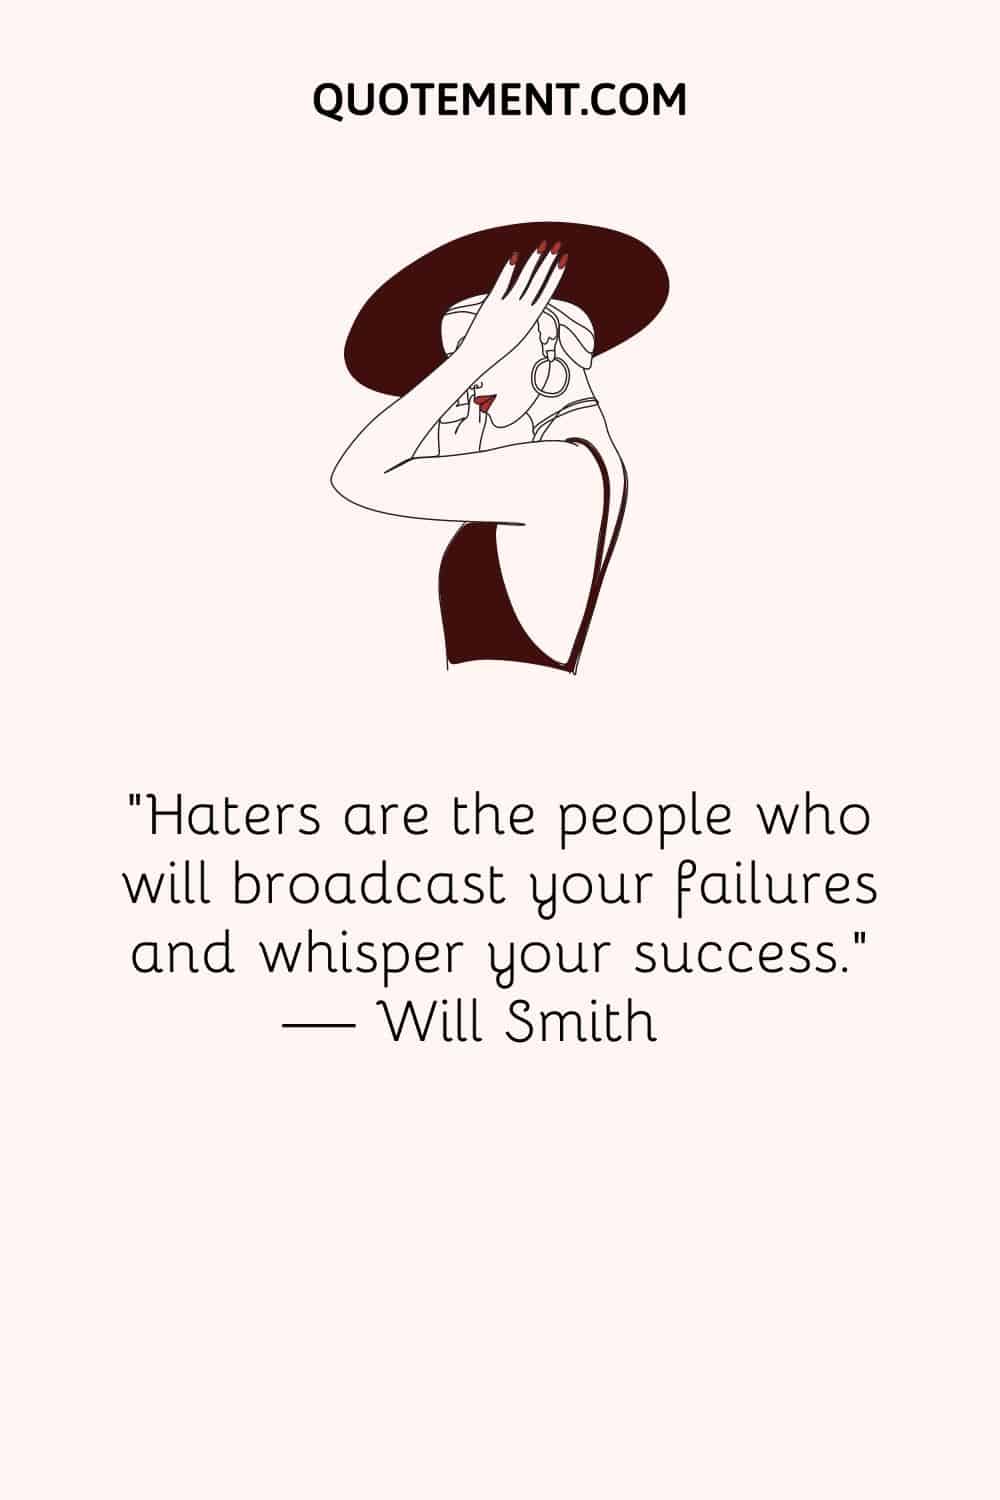 “Haters are the people who will broadcast your failures and whisper your success.” — Will Smith